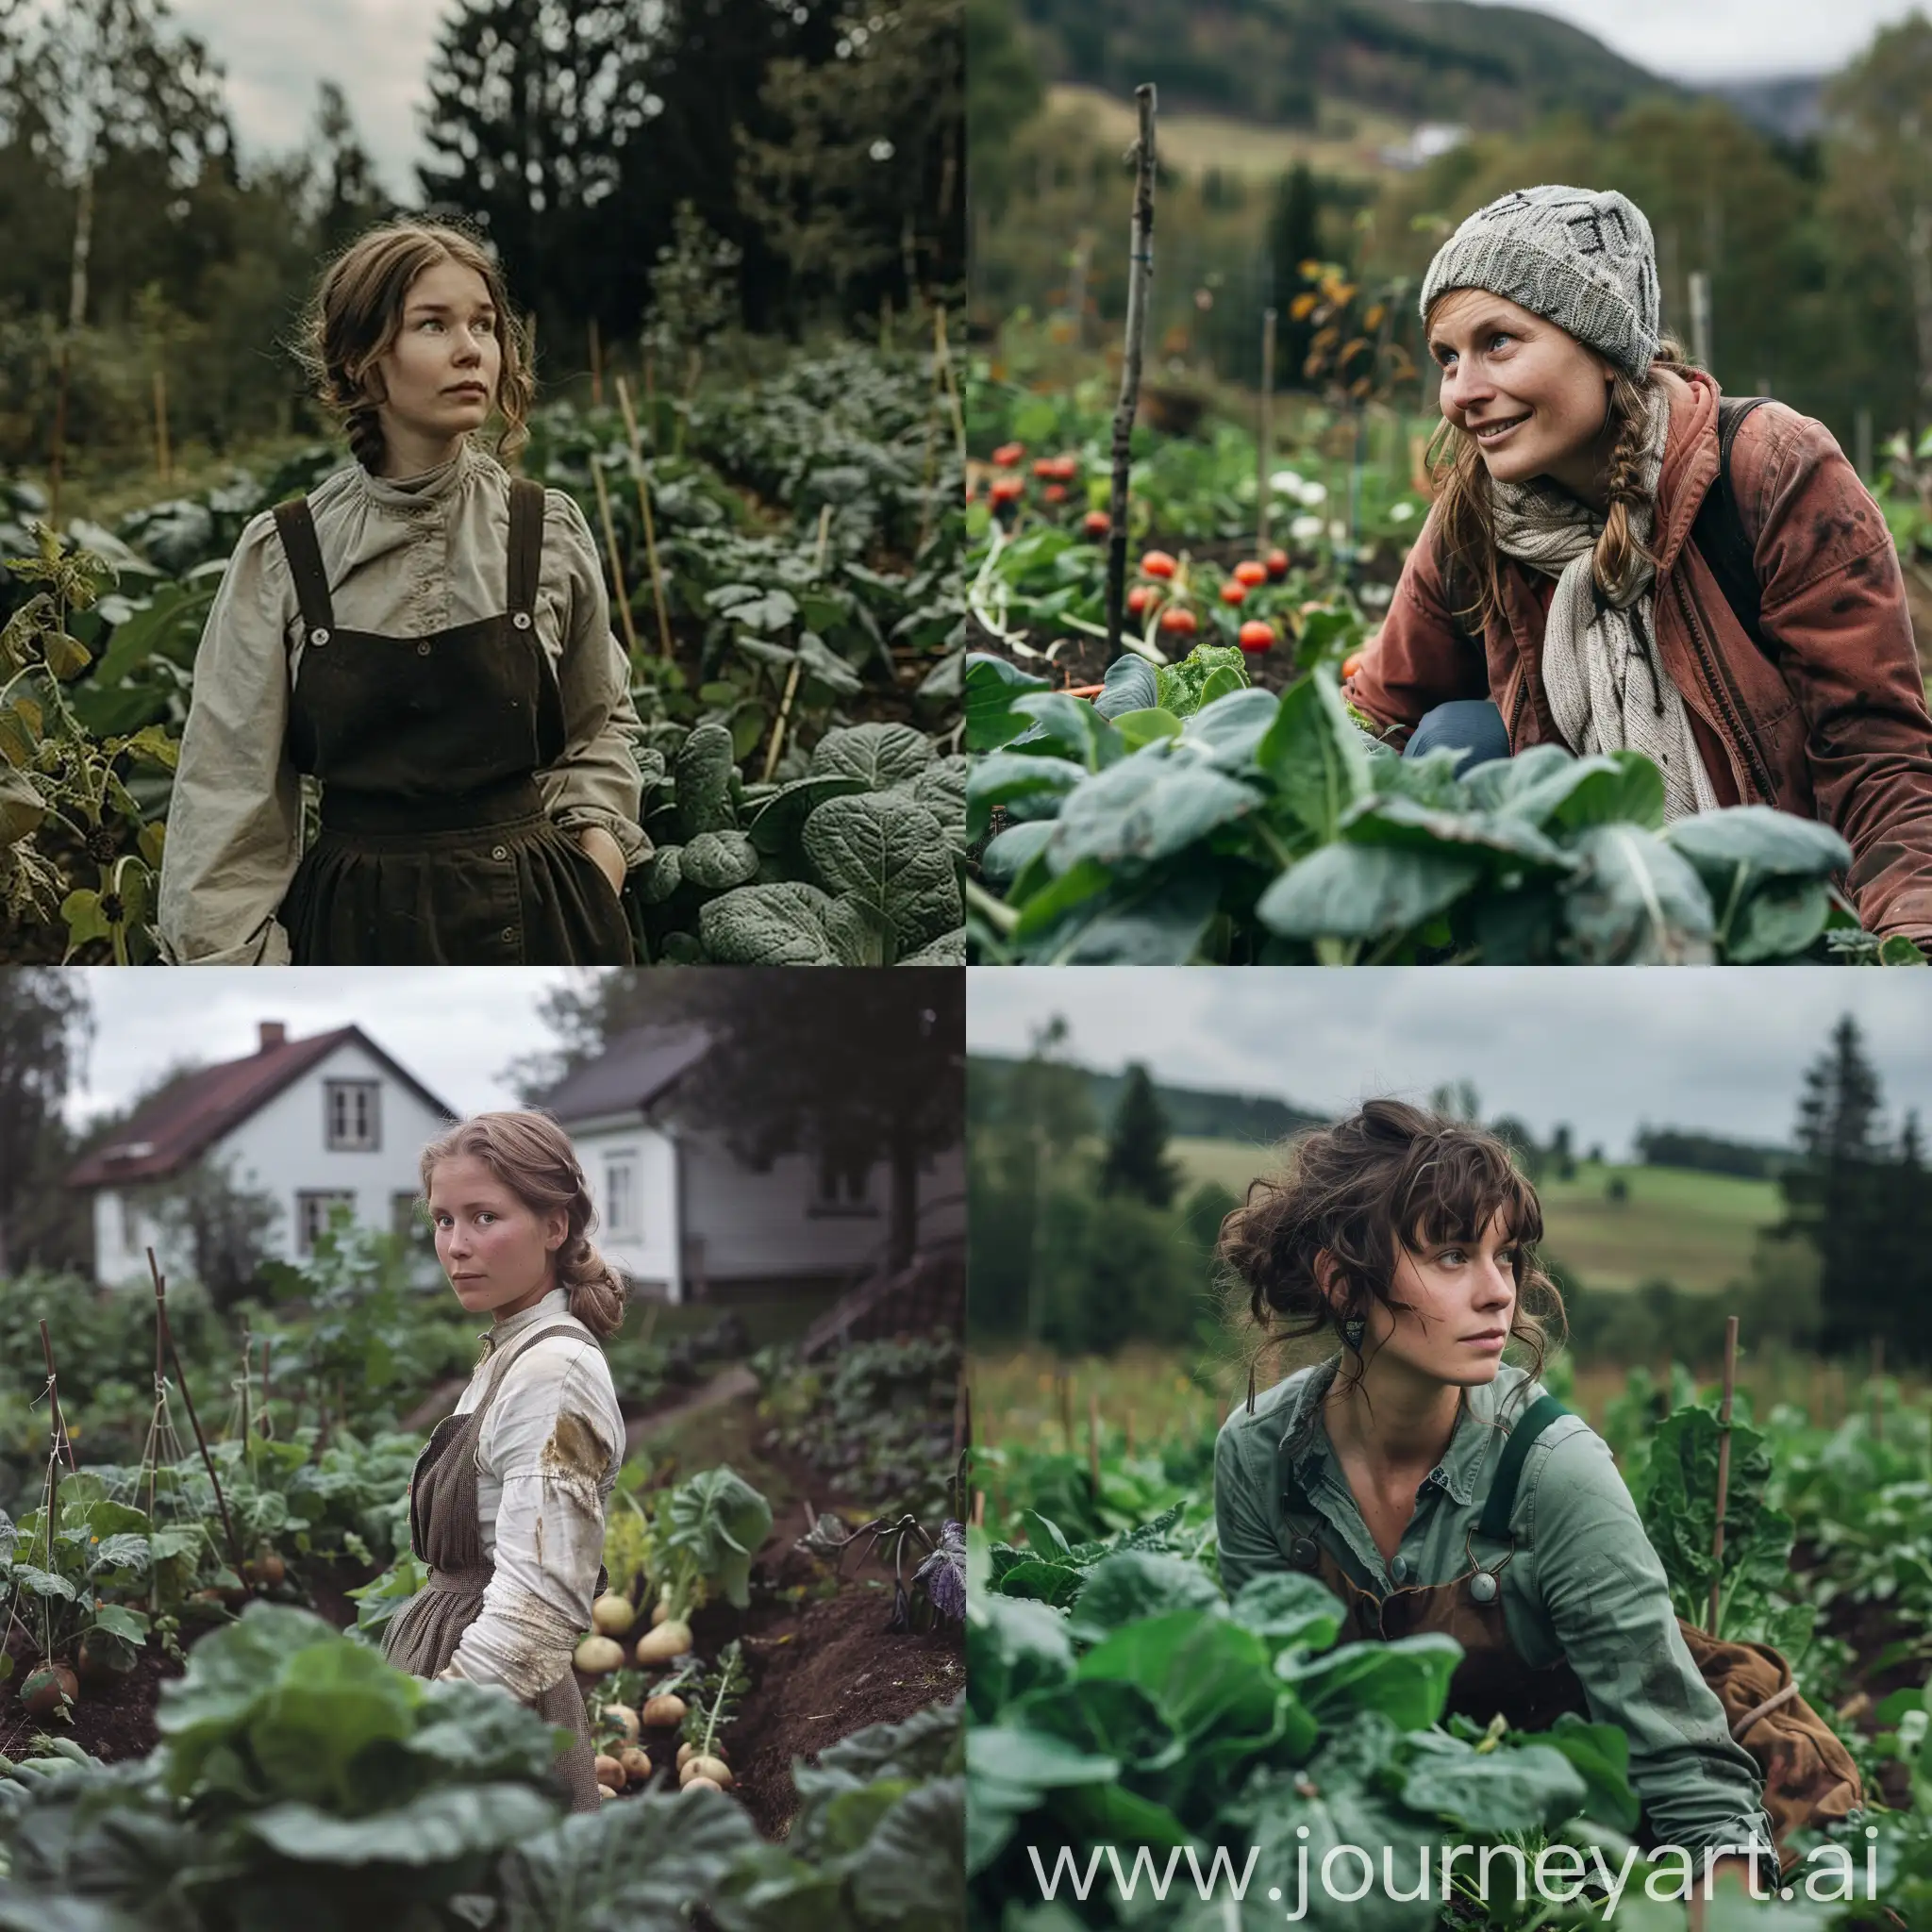 Young-Woman-Gardening-in-a-NorwegianStyle-Vegetable-Patch